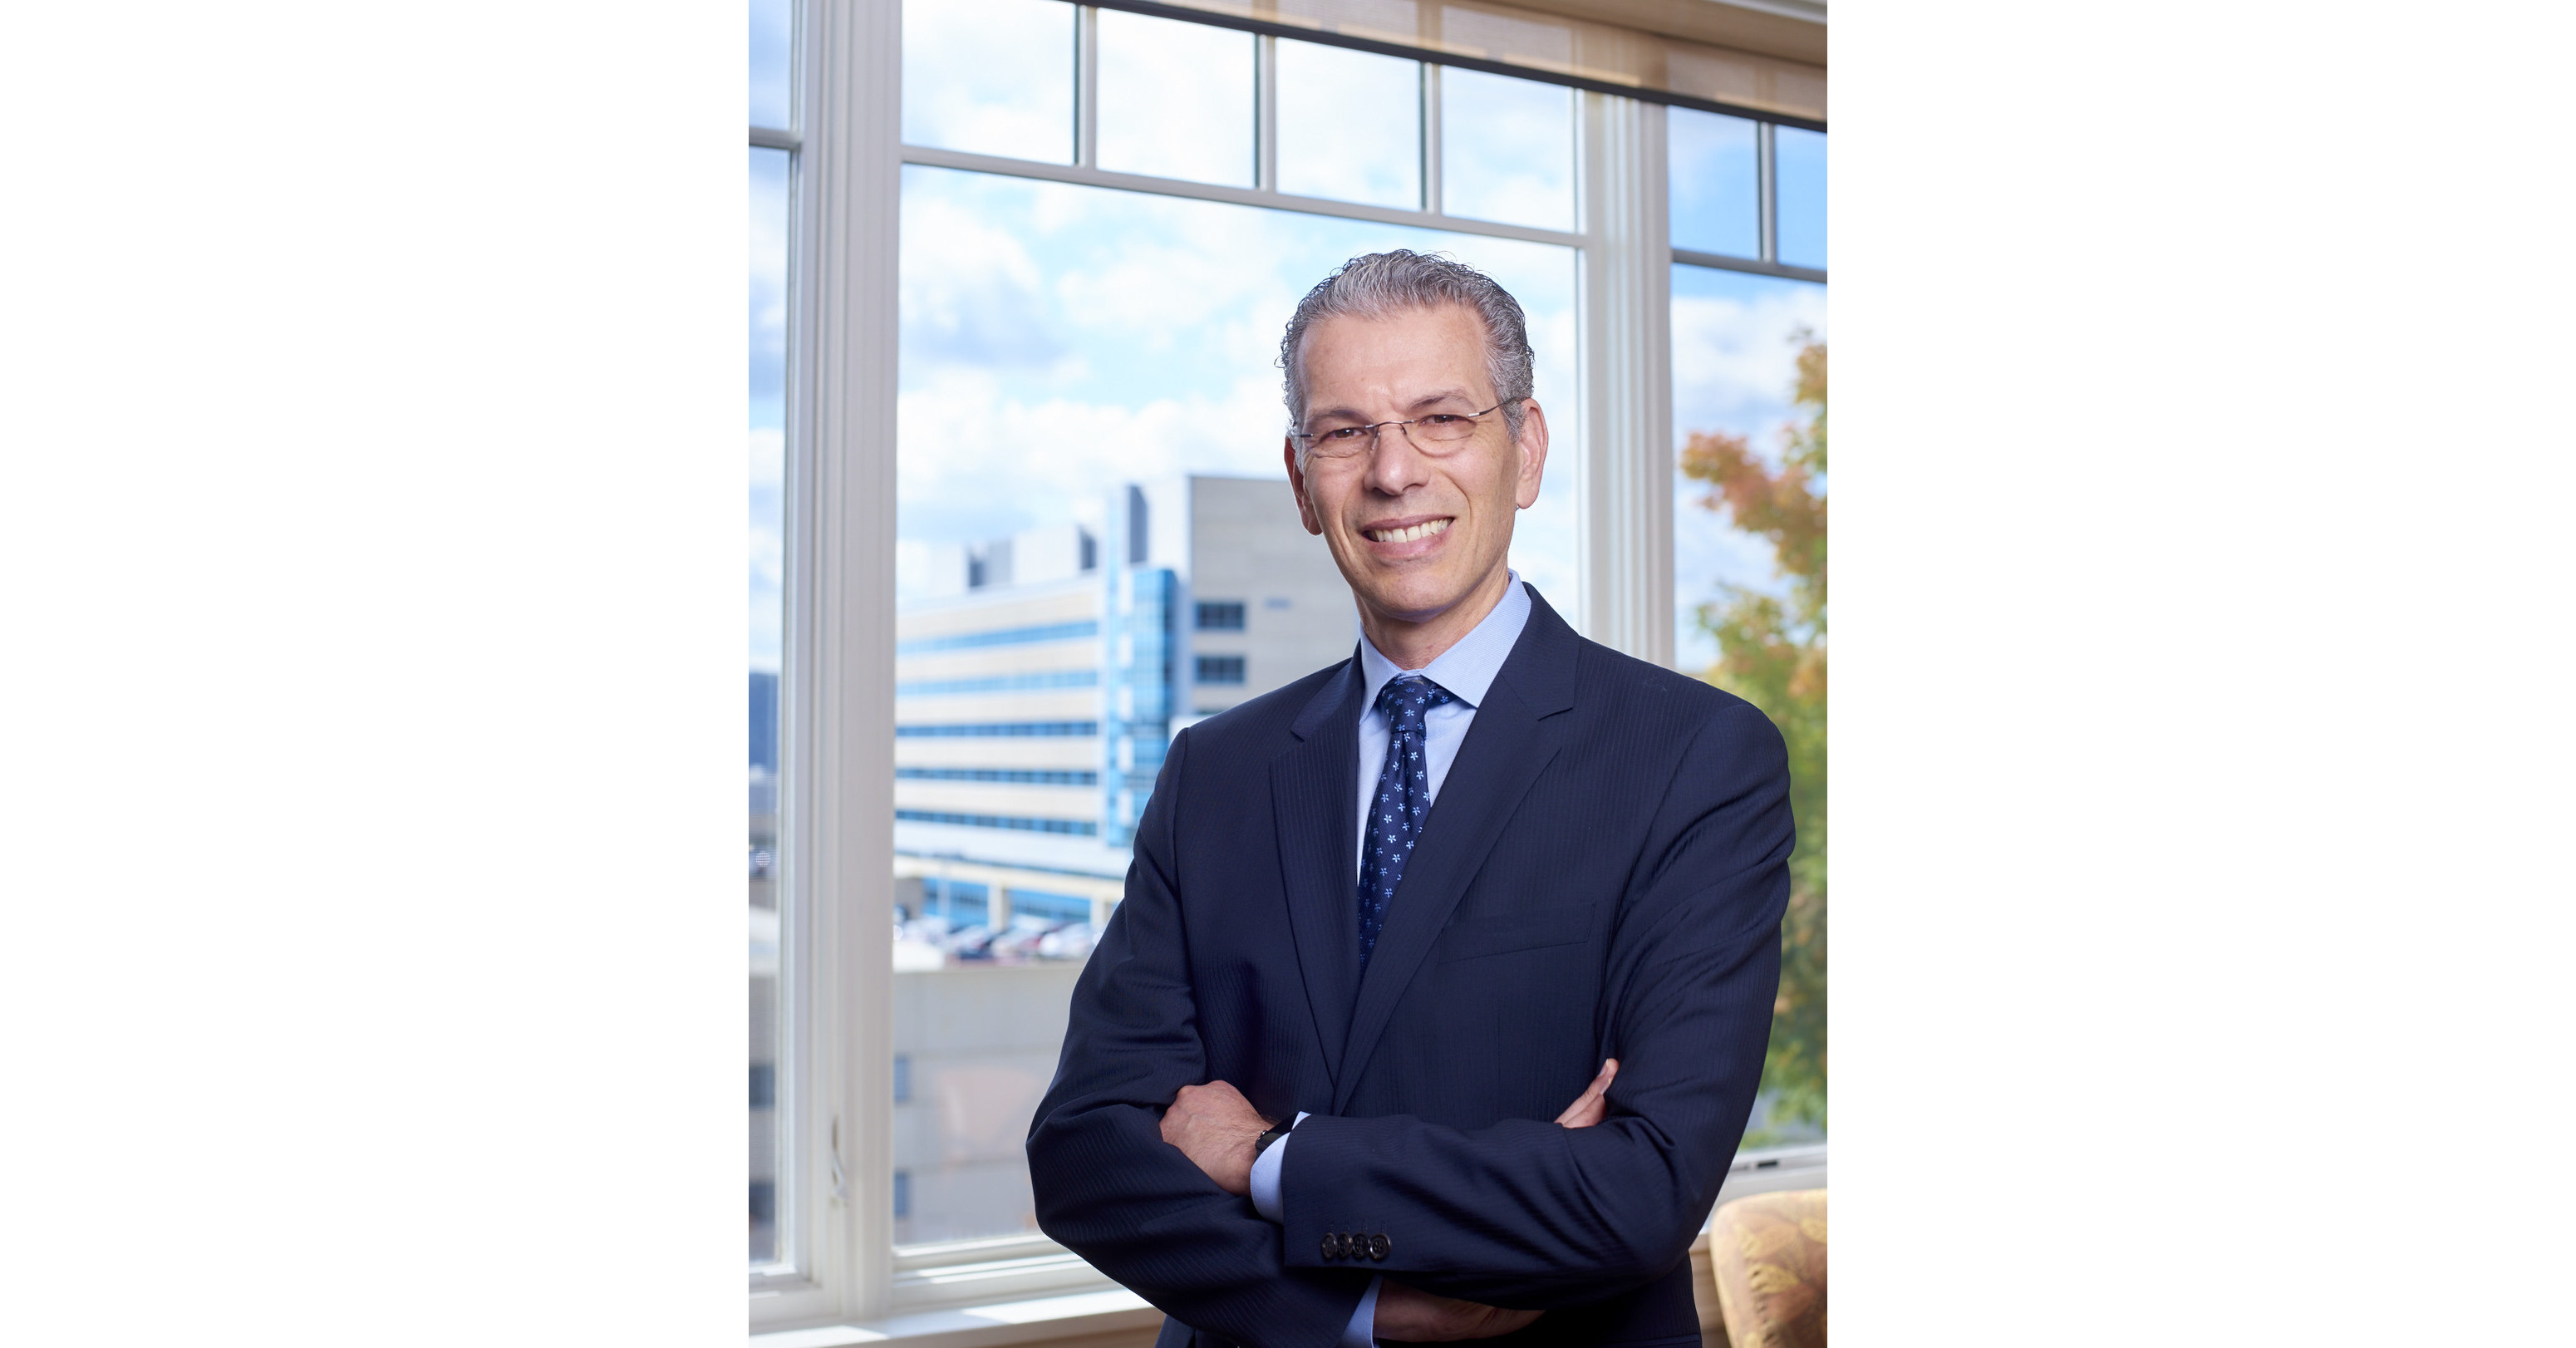 Geisinger President & CEO to debate the state of healthcare